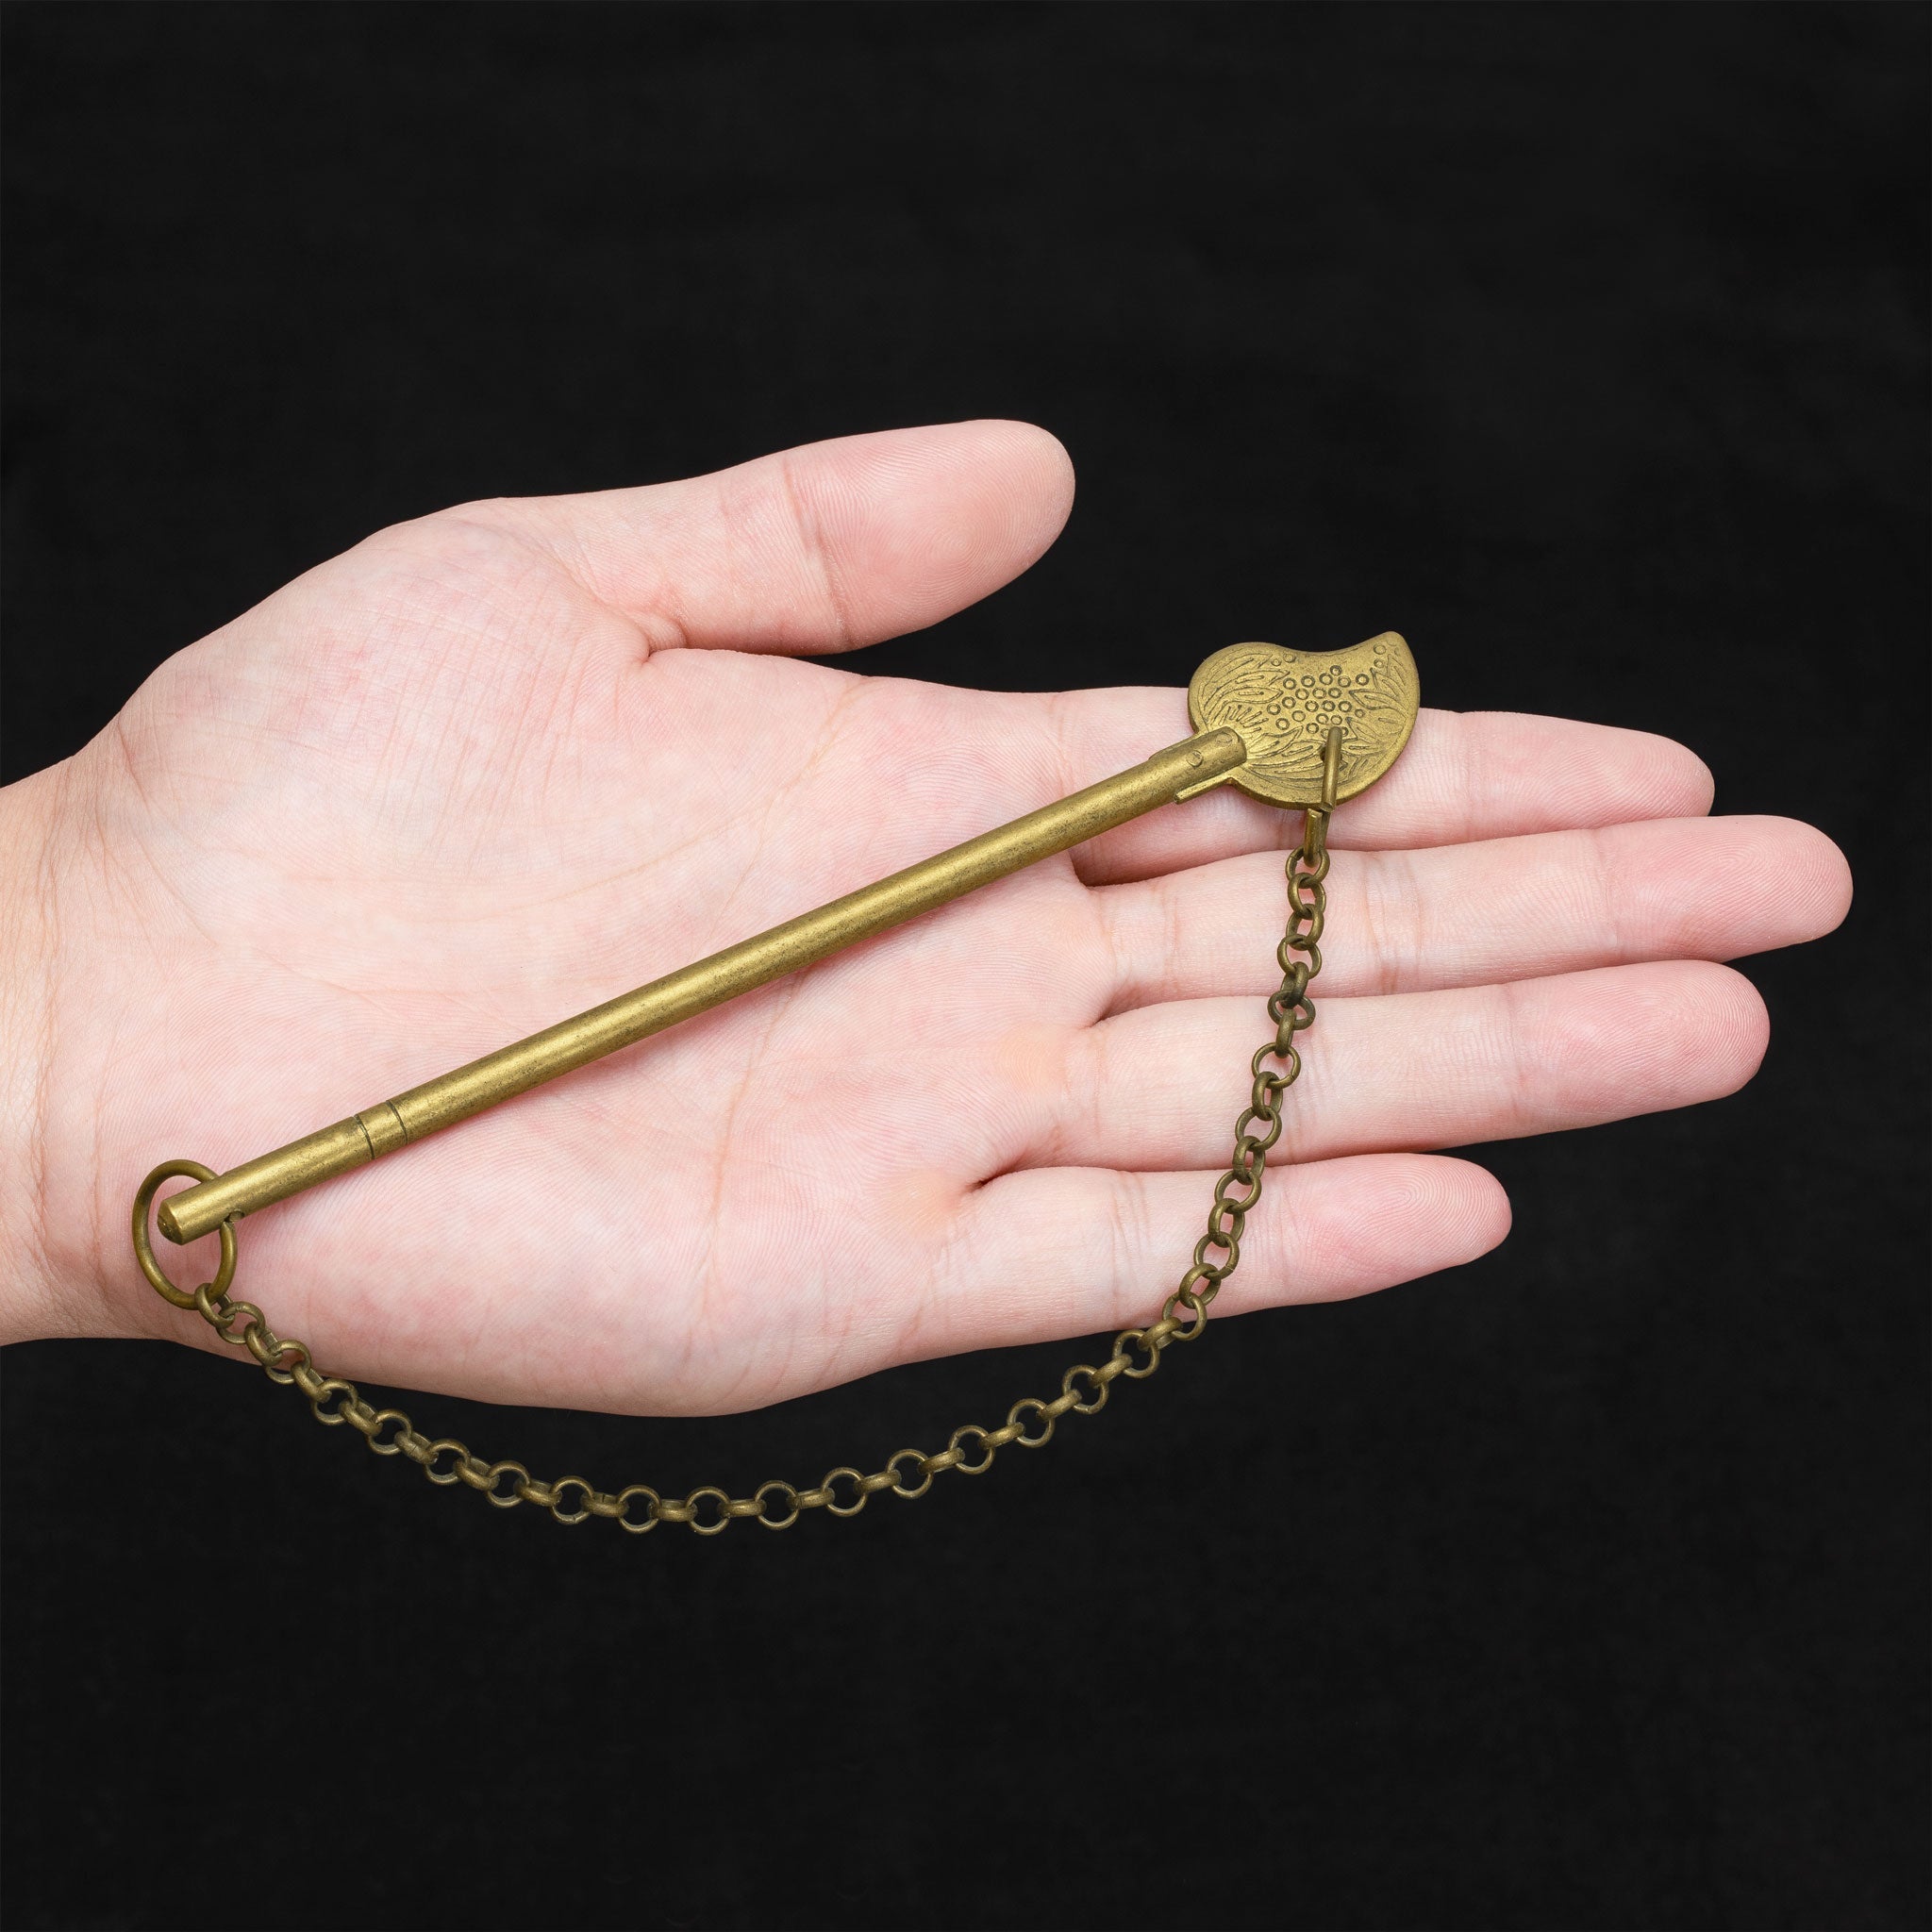 Bird Tail Key with Chain 4.6" - Set of 2-Chinese Brass Hardware